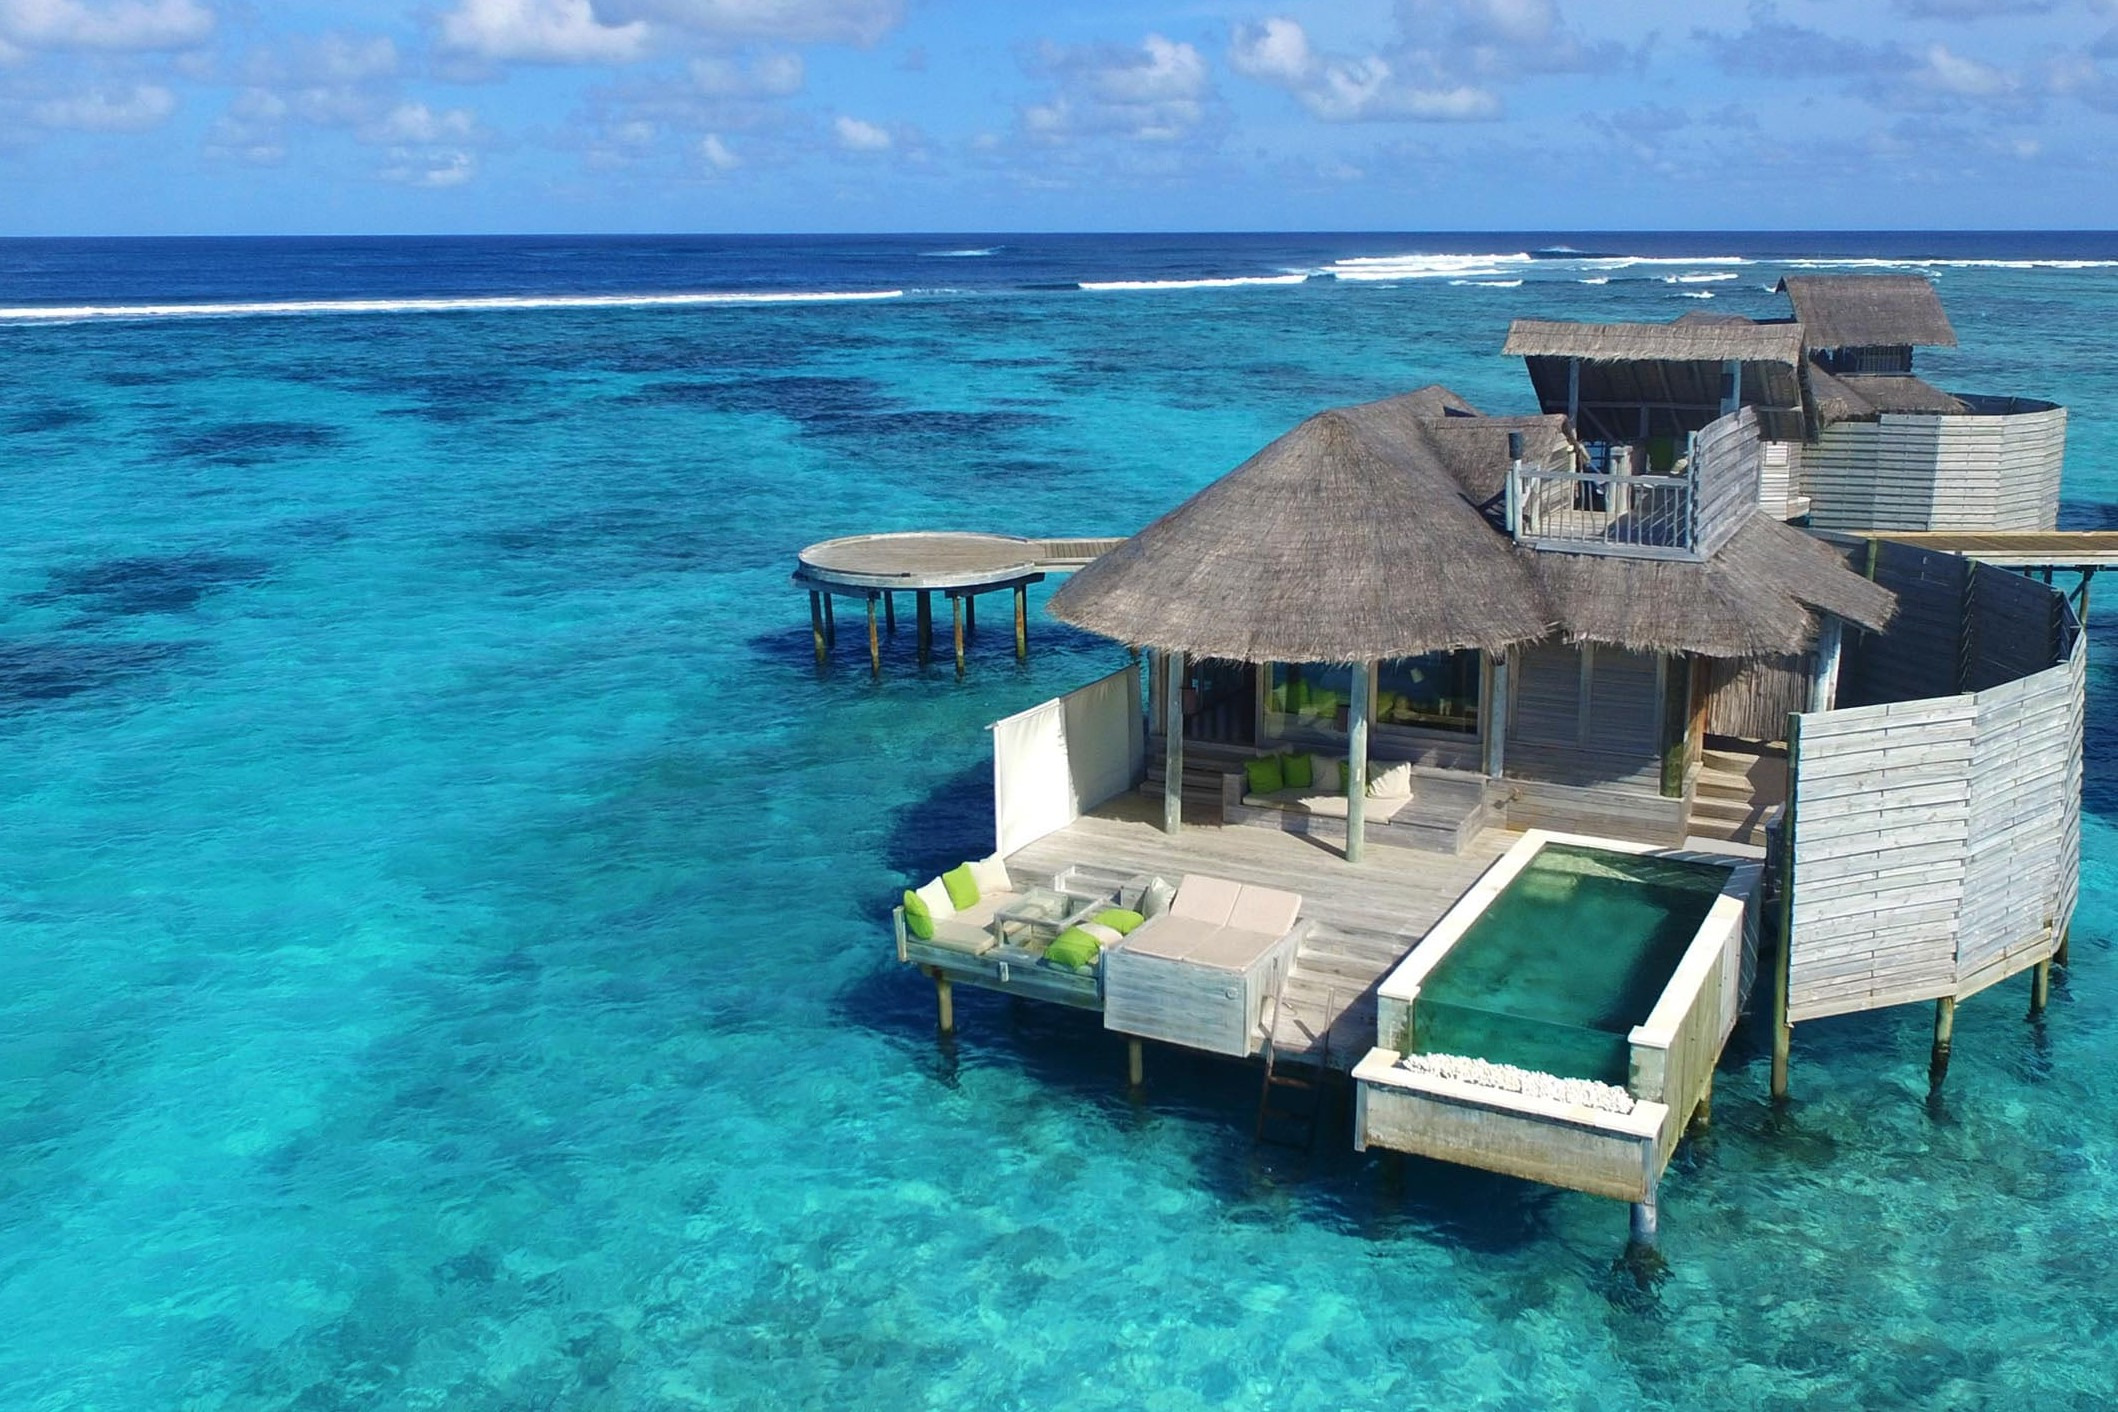 Redeem IHG Rewards points for an overwater villa at Six Senses in the Maldives.